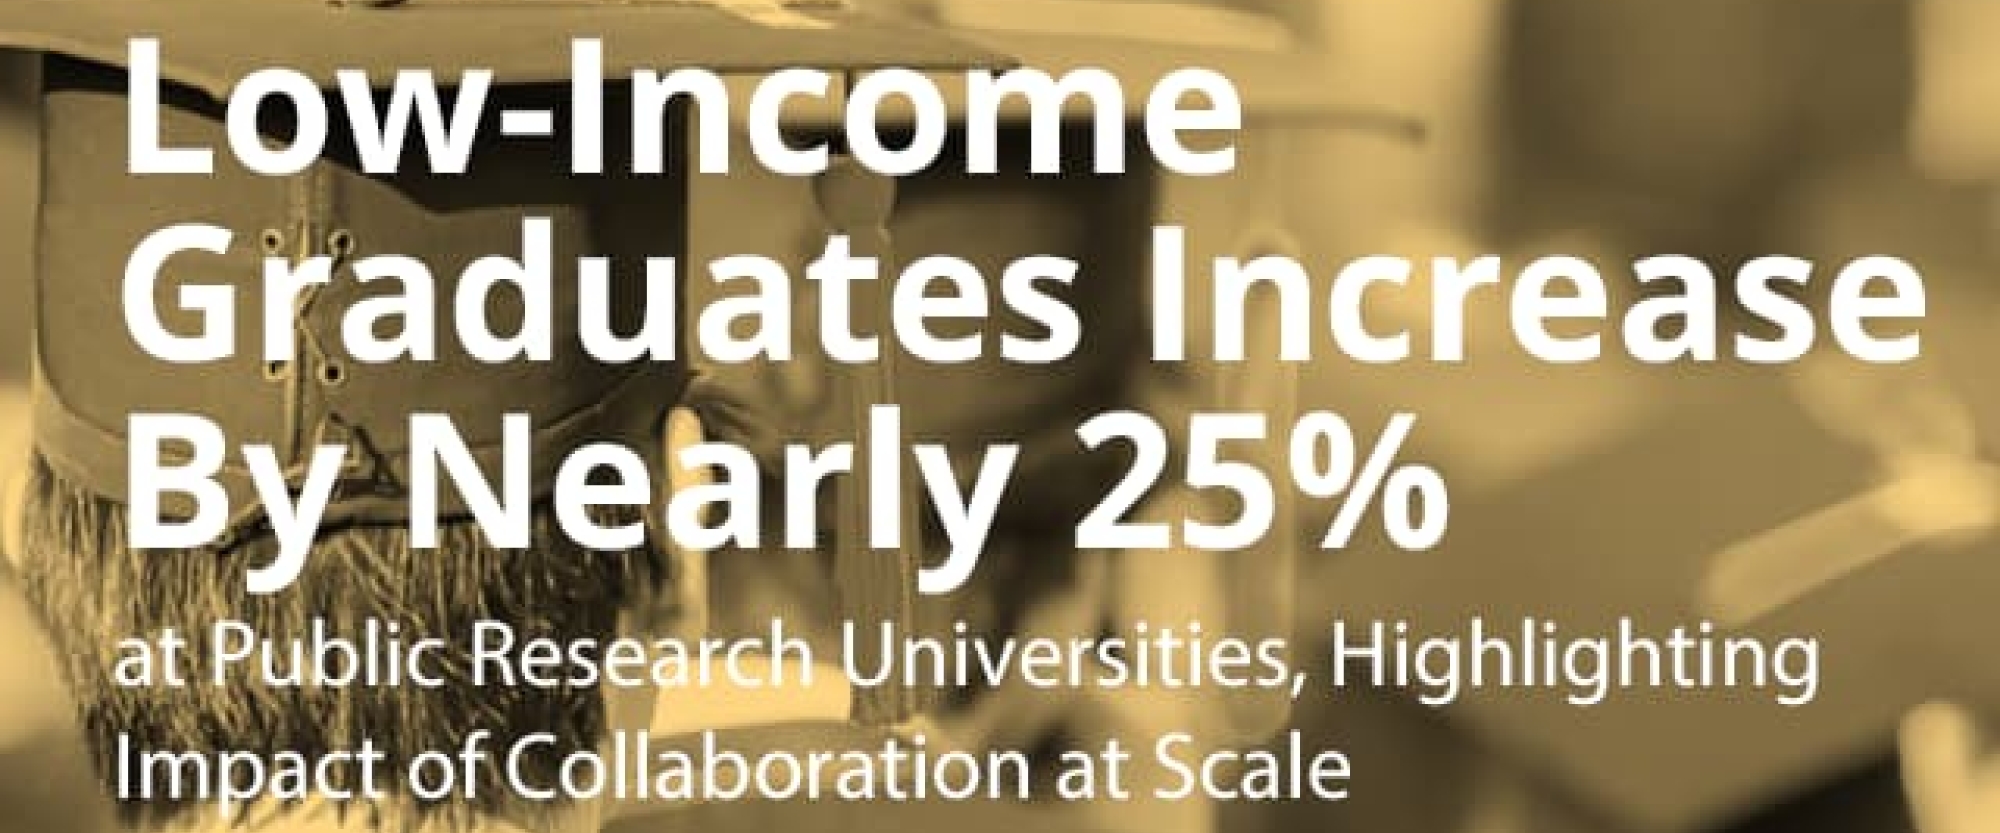 Public Research Universities Increase Low-Income Graduates by Nearly 25%, Highlighting Impact of Collaboration at Scale